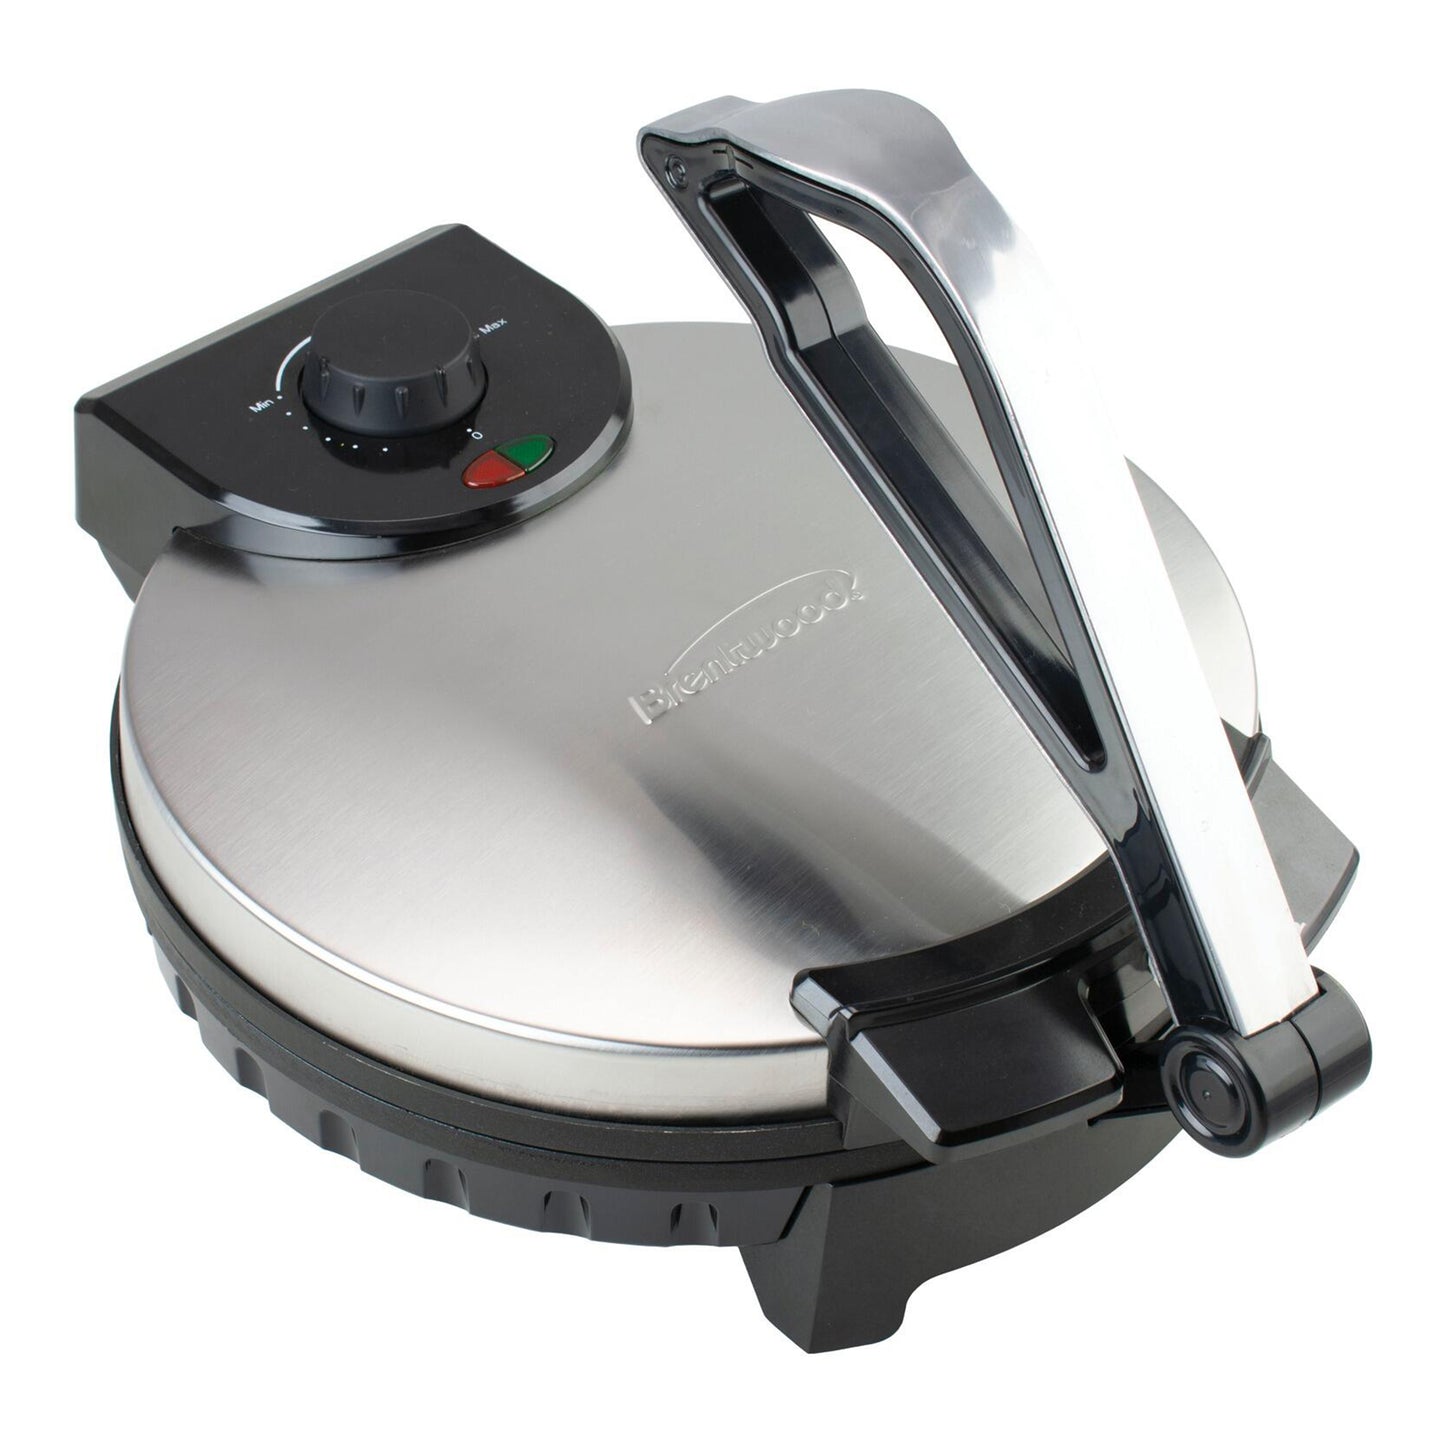 Brentwood Brentwood 12 Inch Stainless Steel Nonstick Electric Tortilla Maker